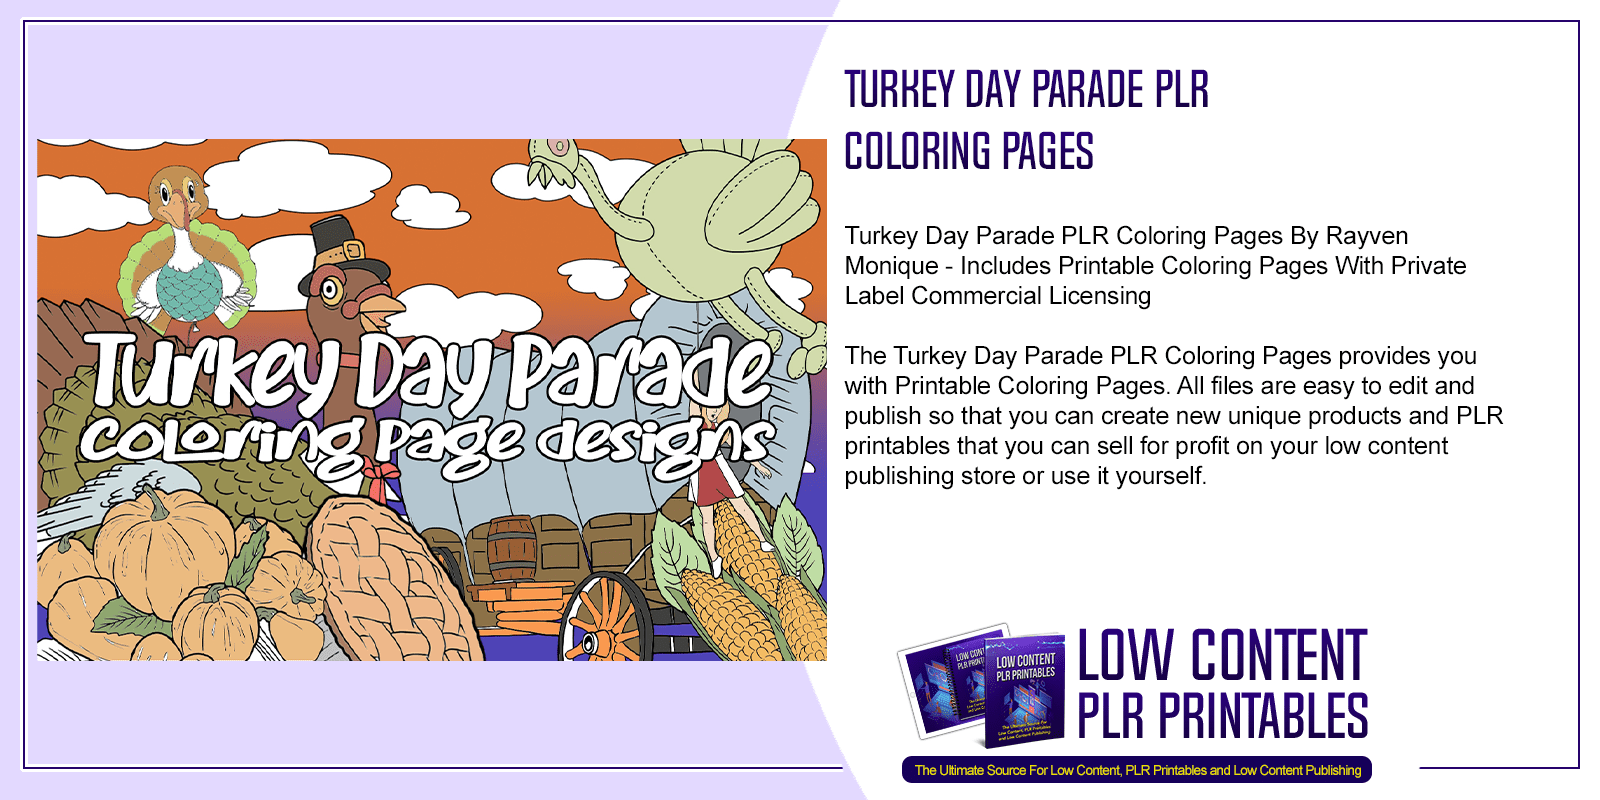 Turkey Day Parade PLR Coloring Pages